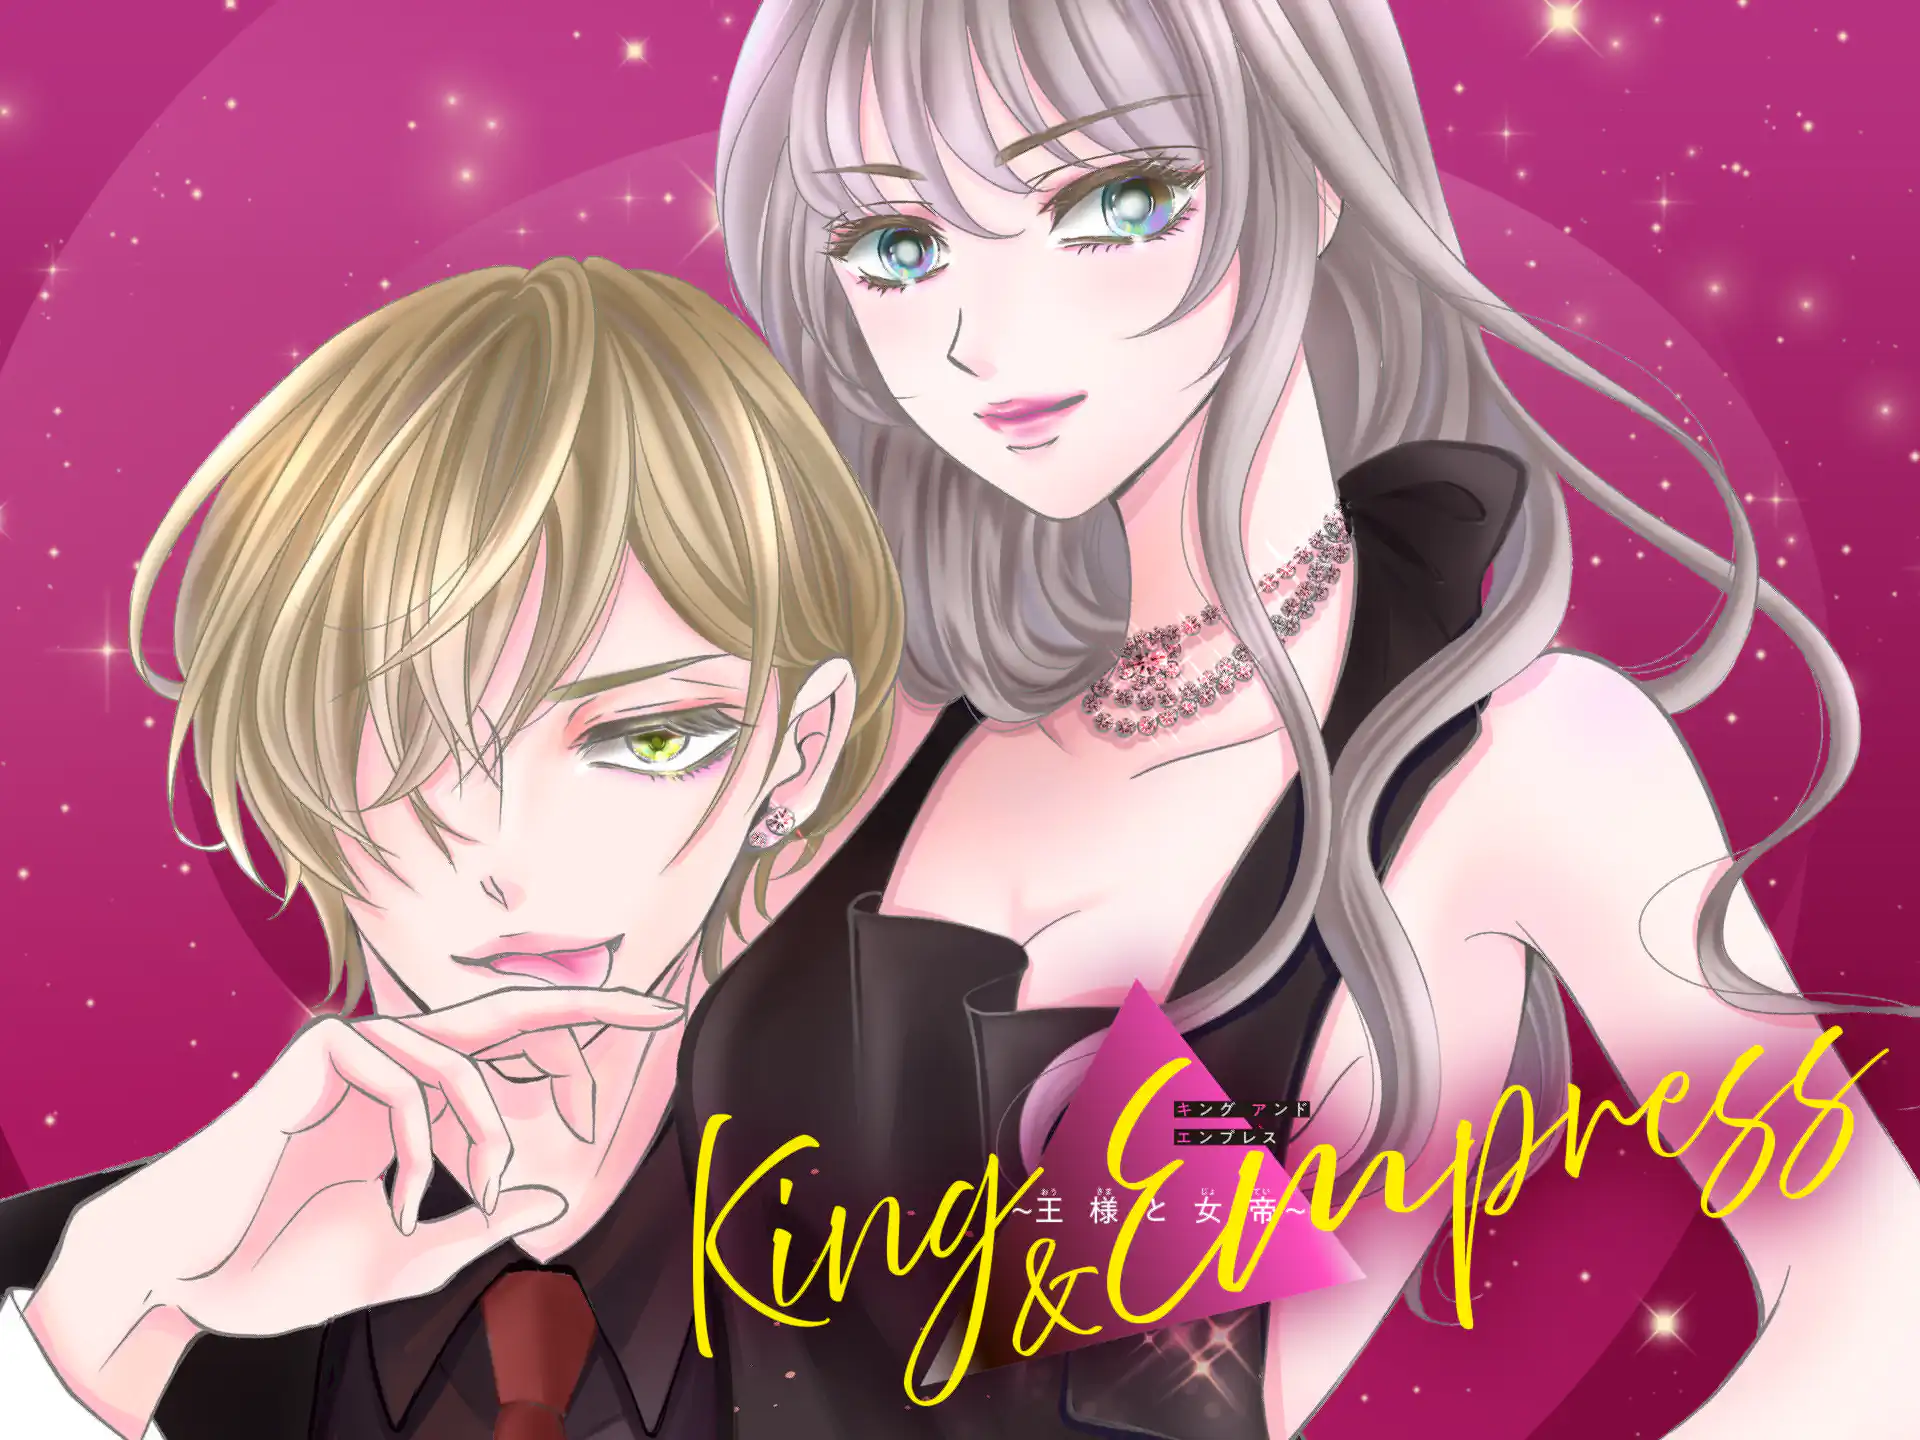 King and Empress〜王様と女帝〜 の作品サムネイル